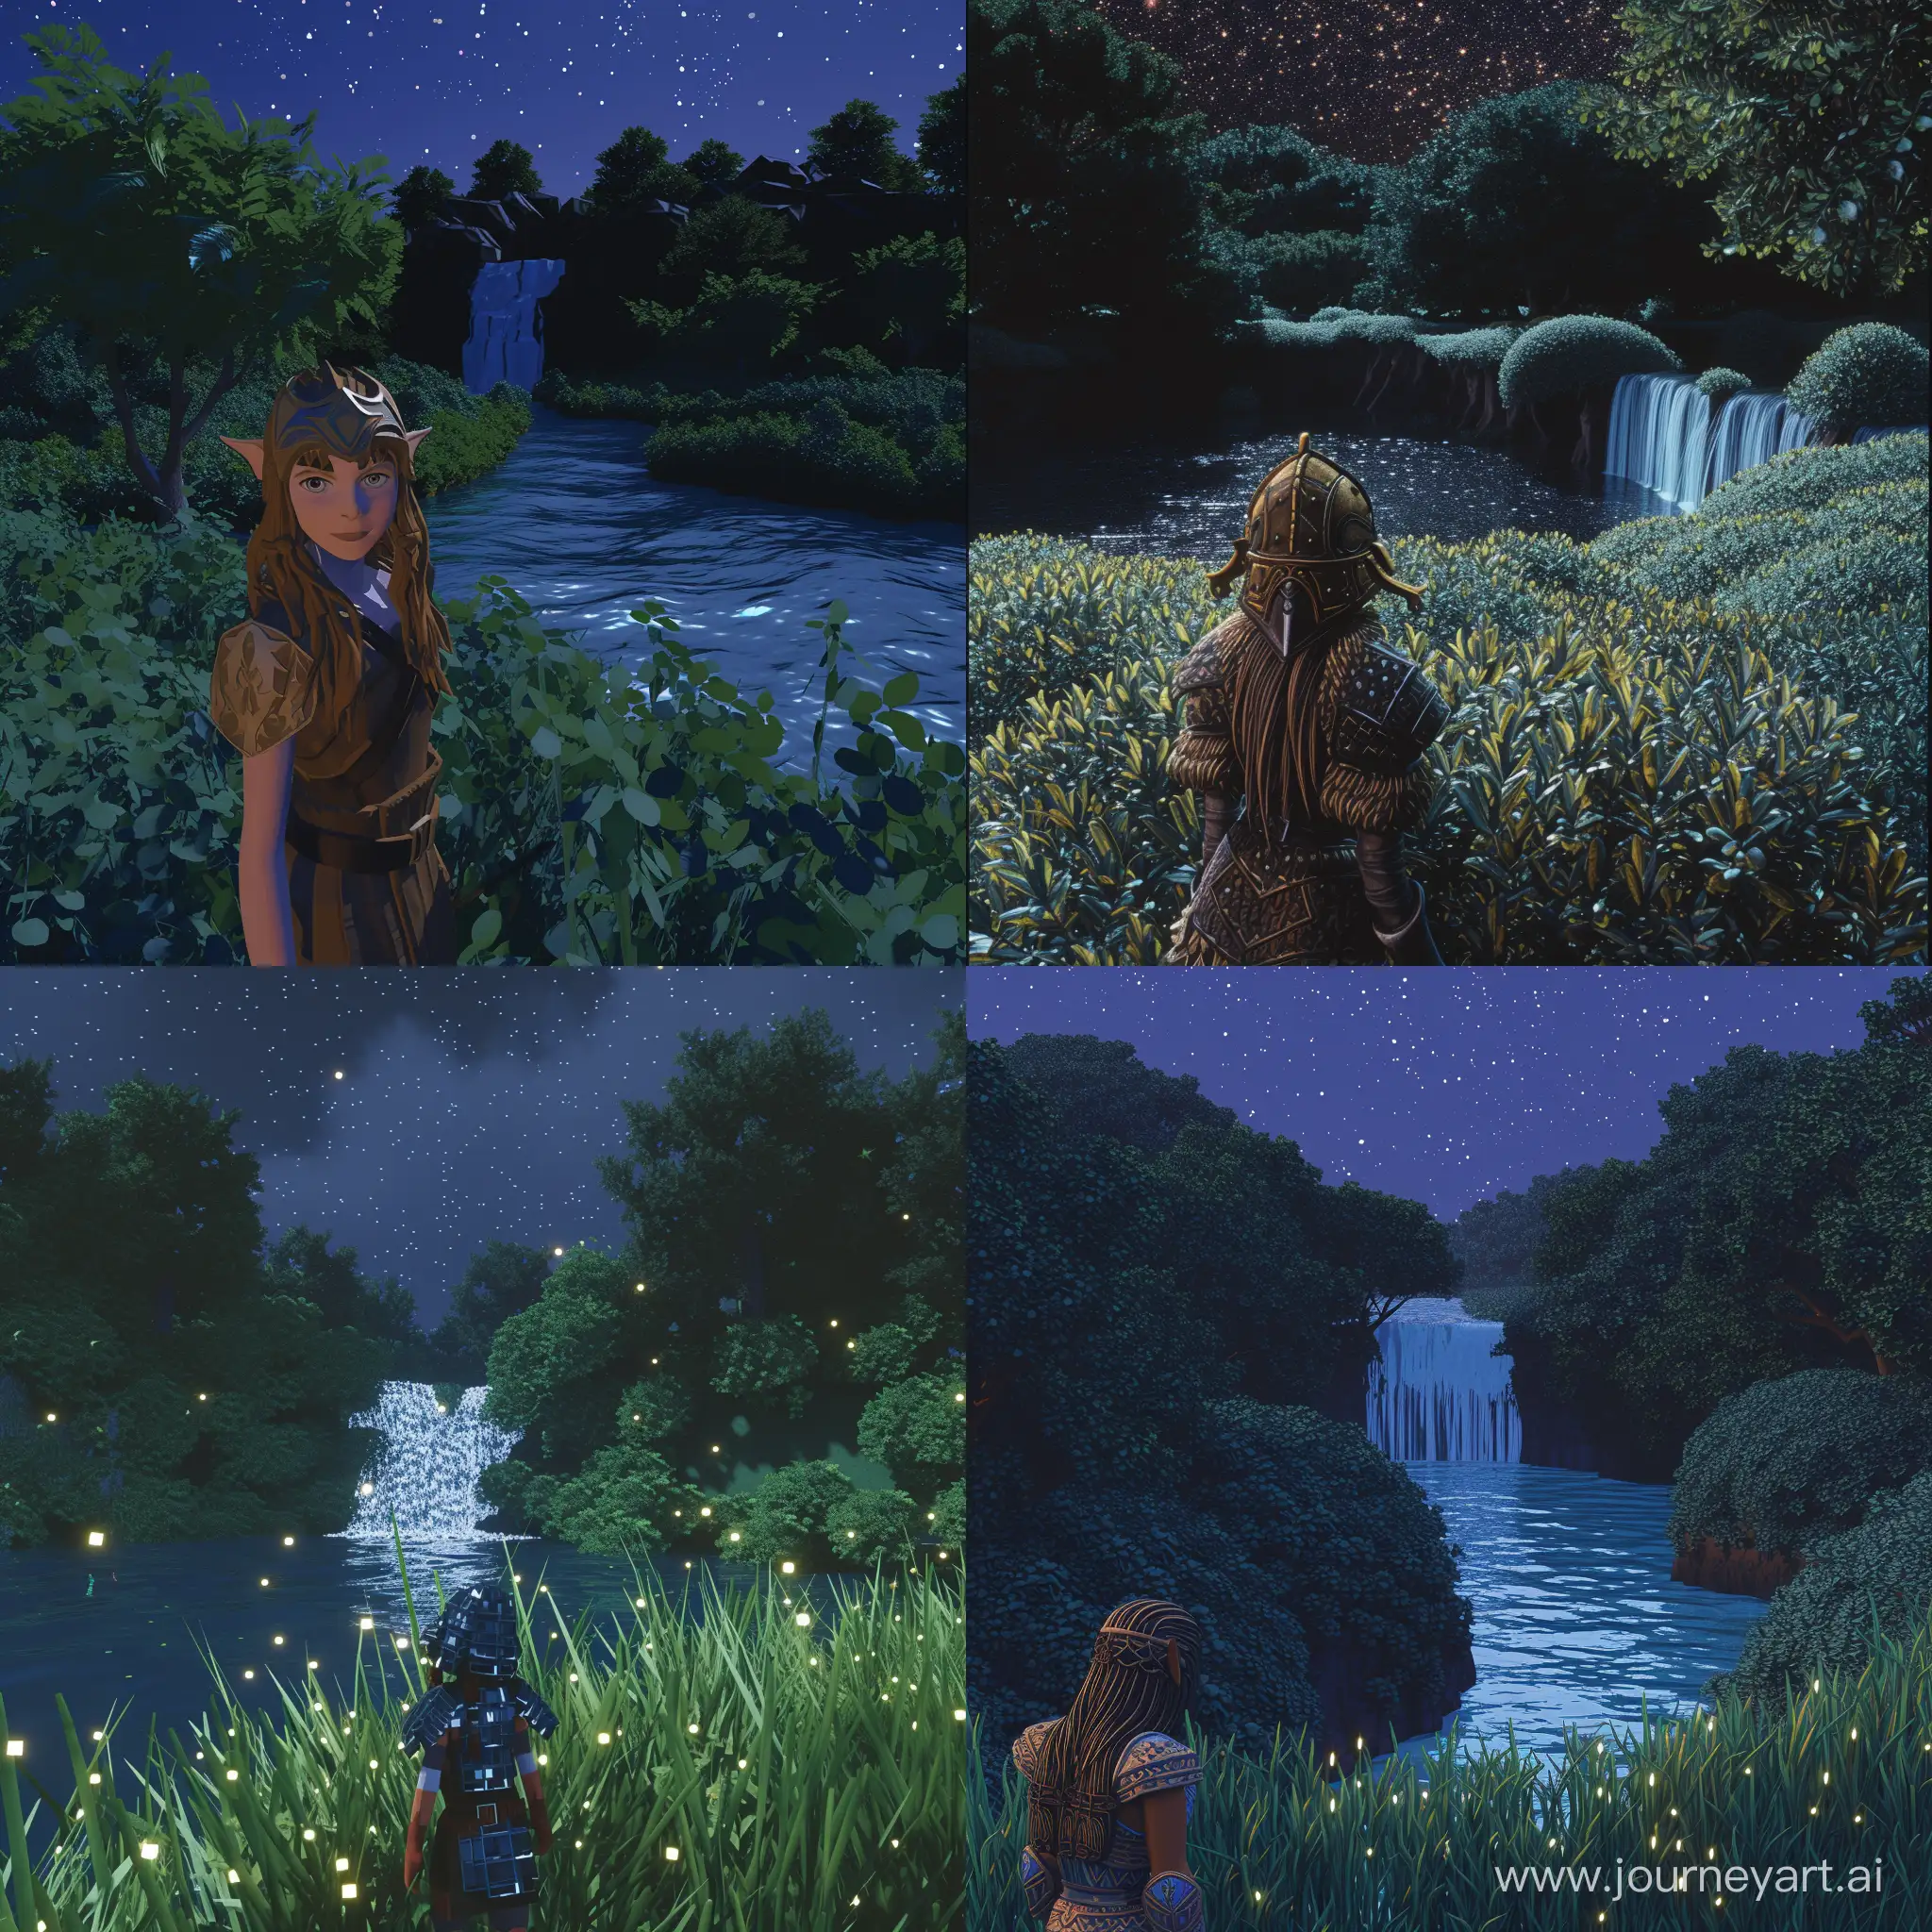 Mystical-Elf-in-LowPoly-Morrowindinspired-World-with-Shimmering-River-and-Starry-Night